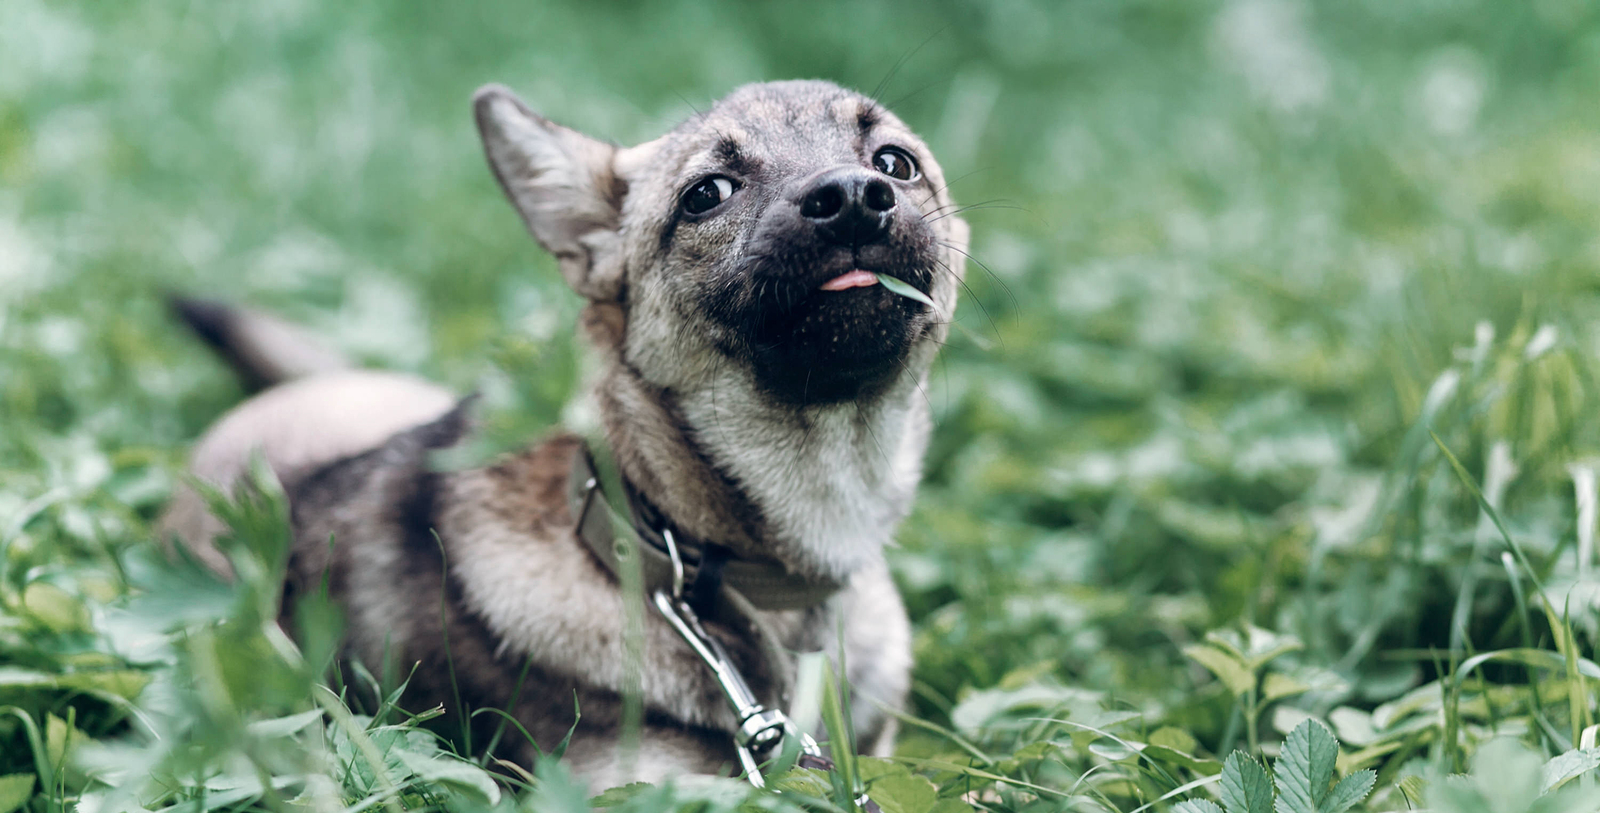 should you let dogs eat grass